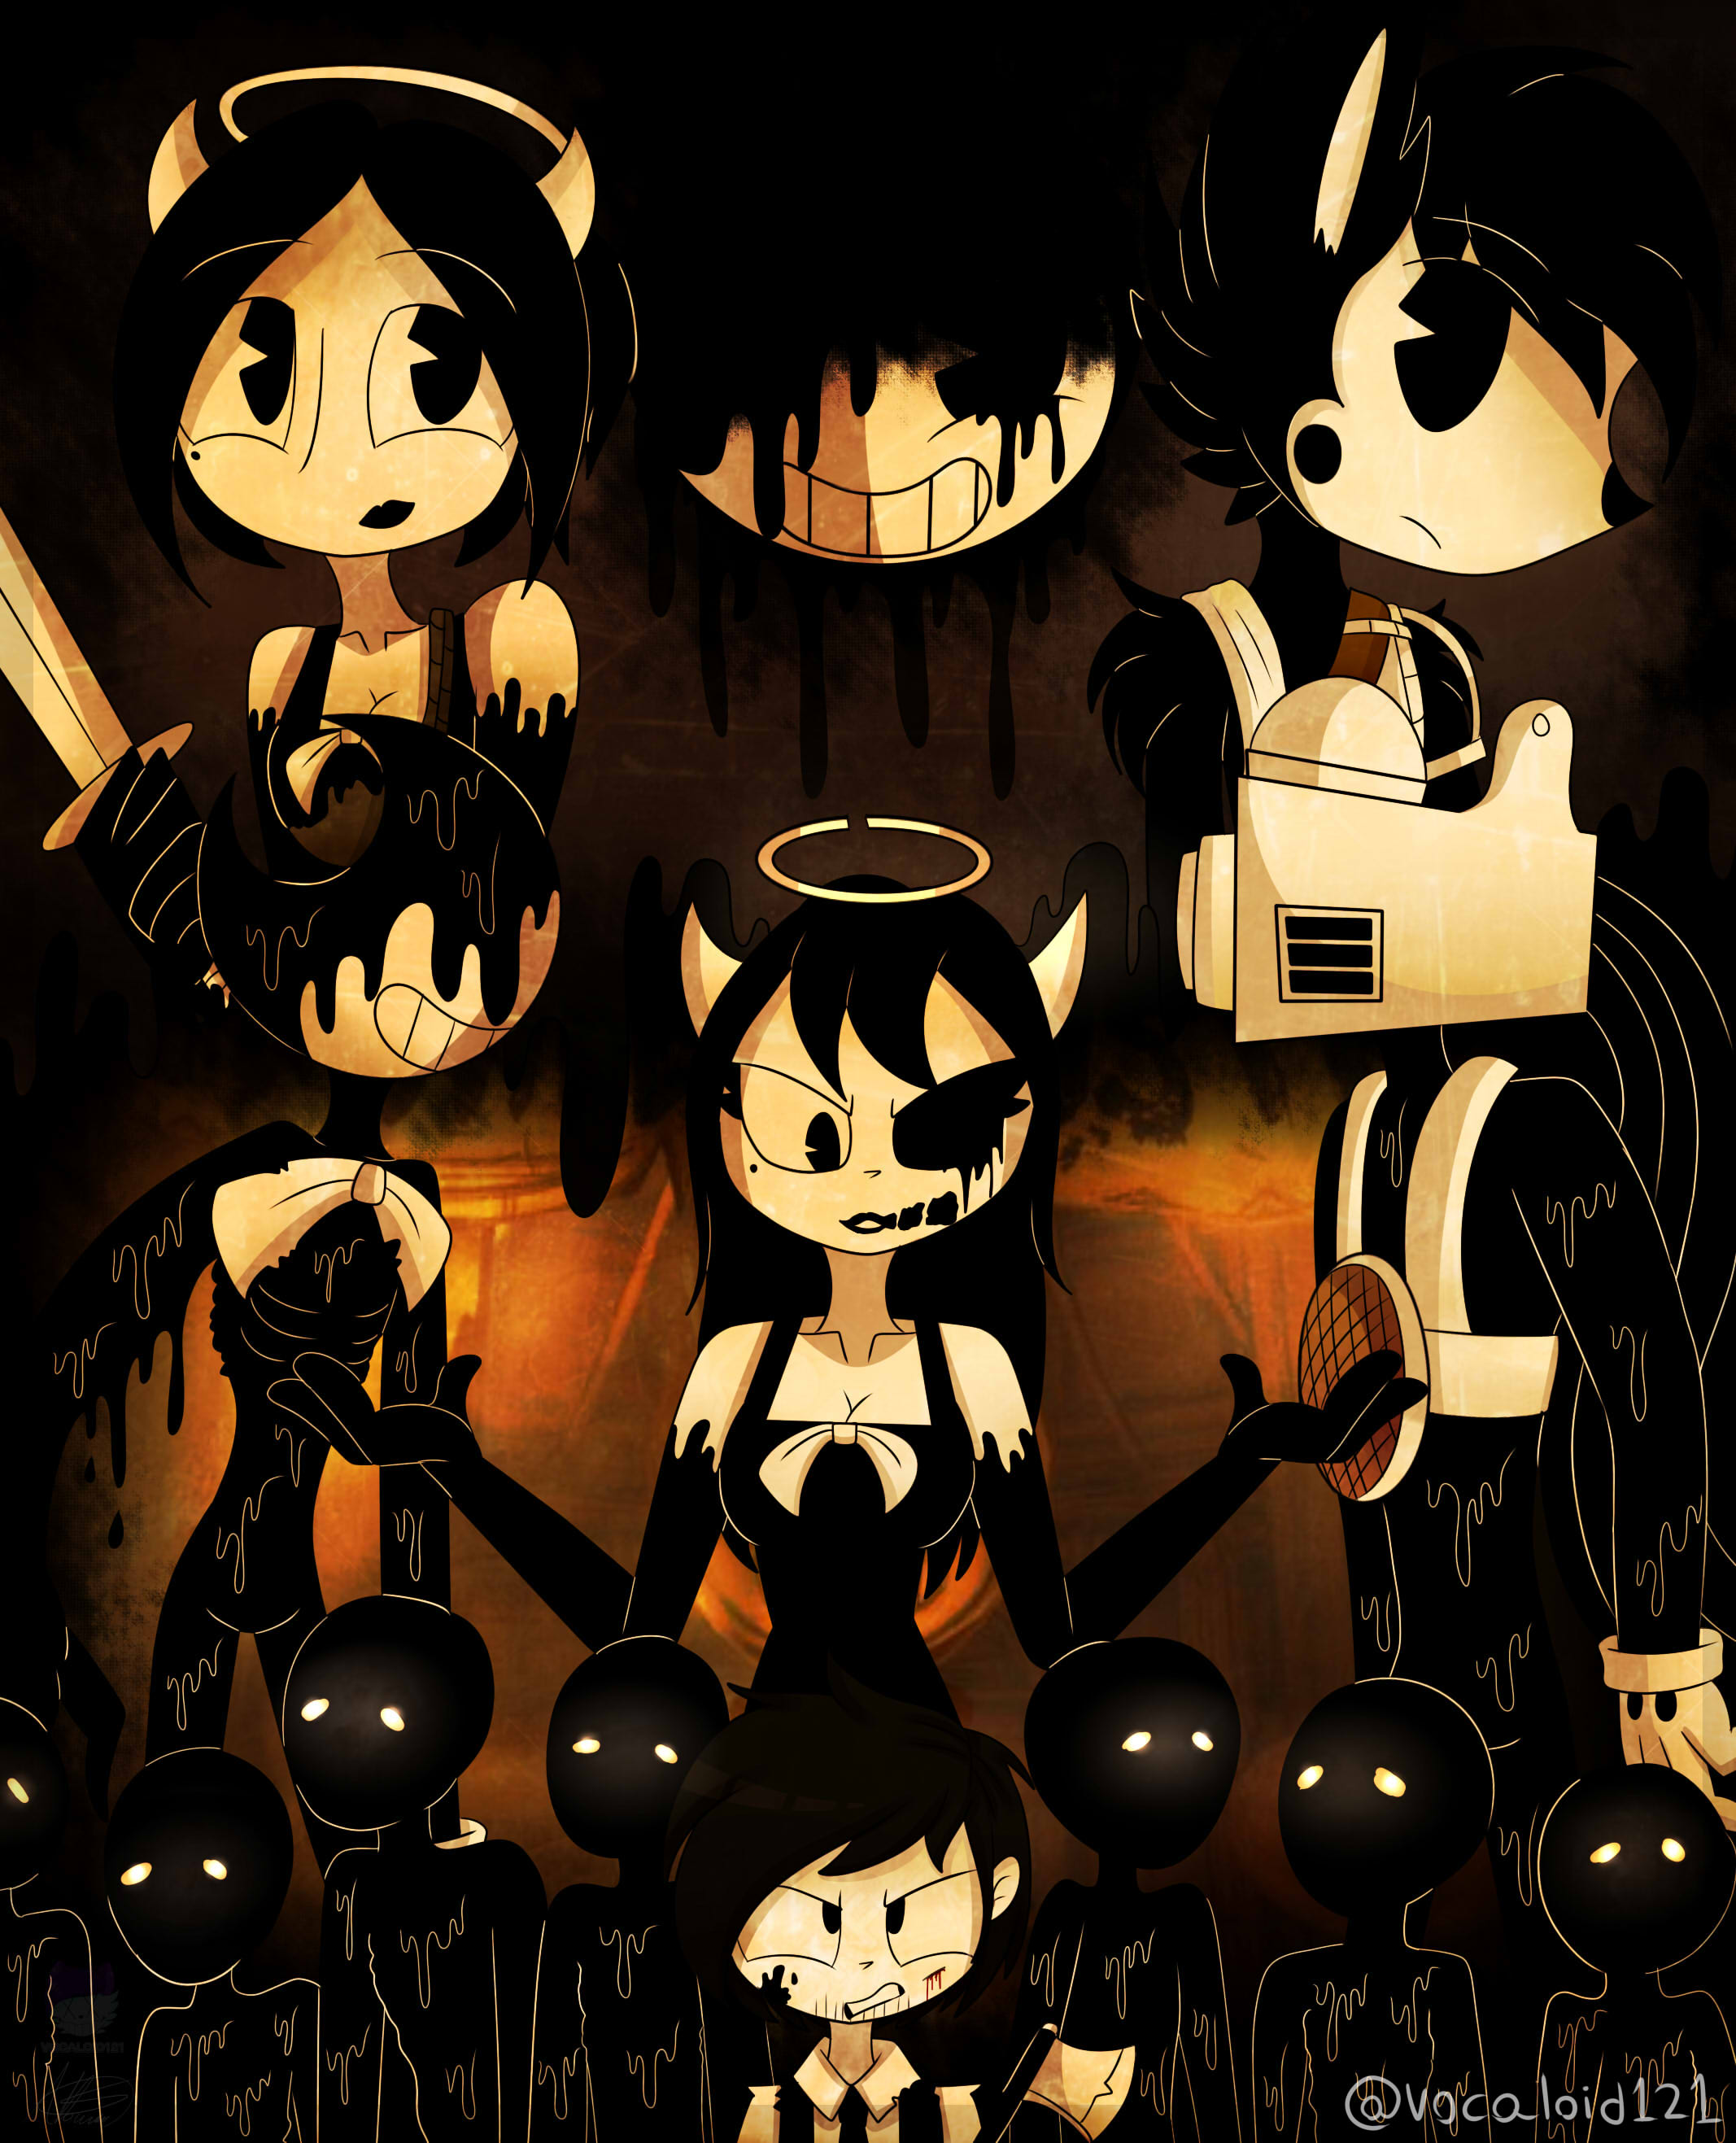 Bendy and the Ink Machine Chapter 4 Colossal Wonders (2018) MP3